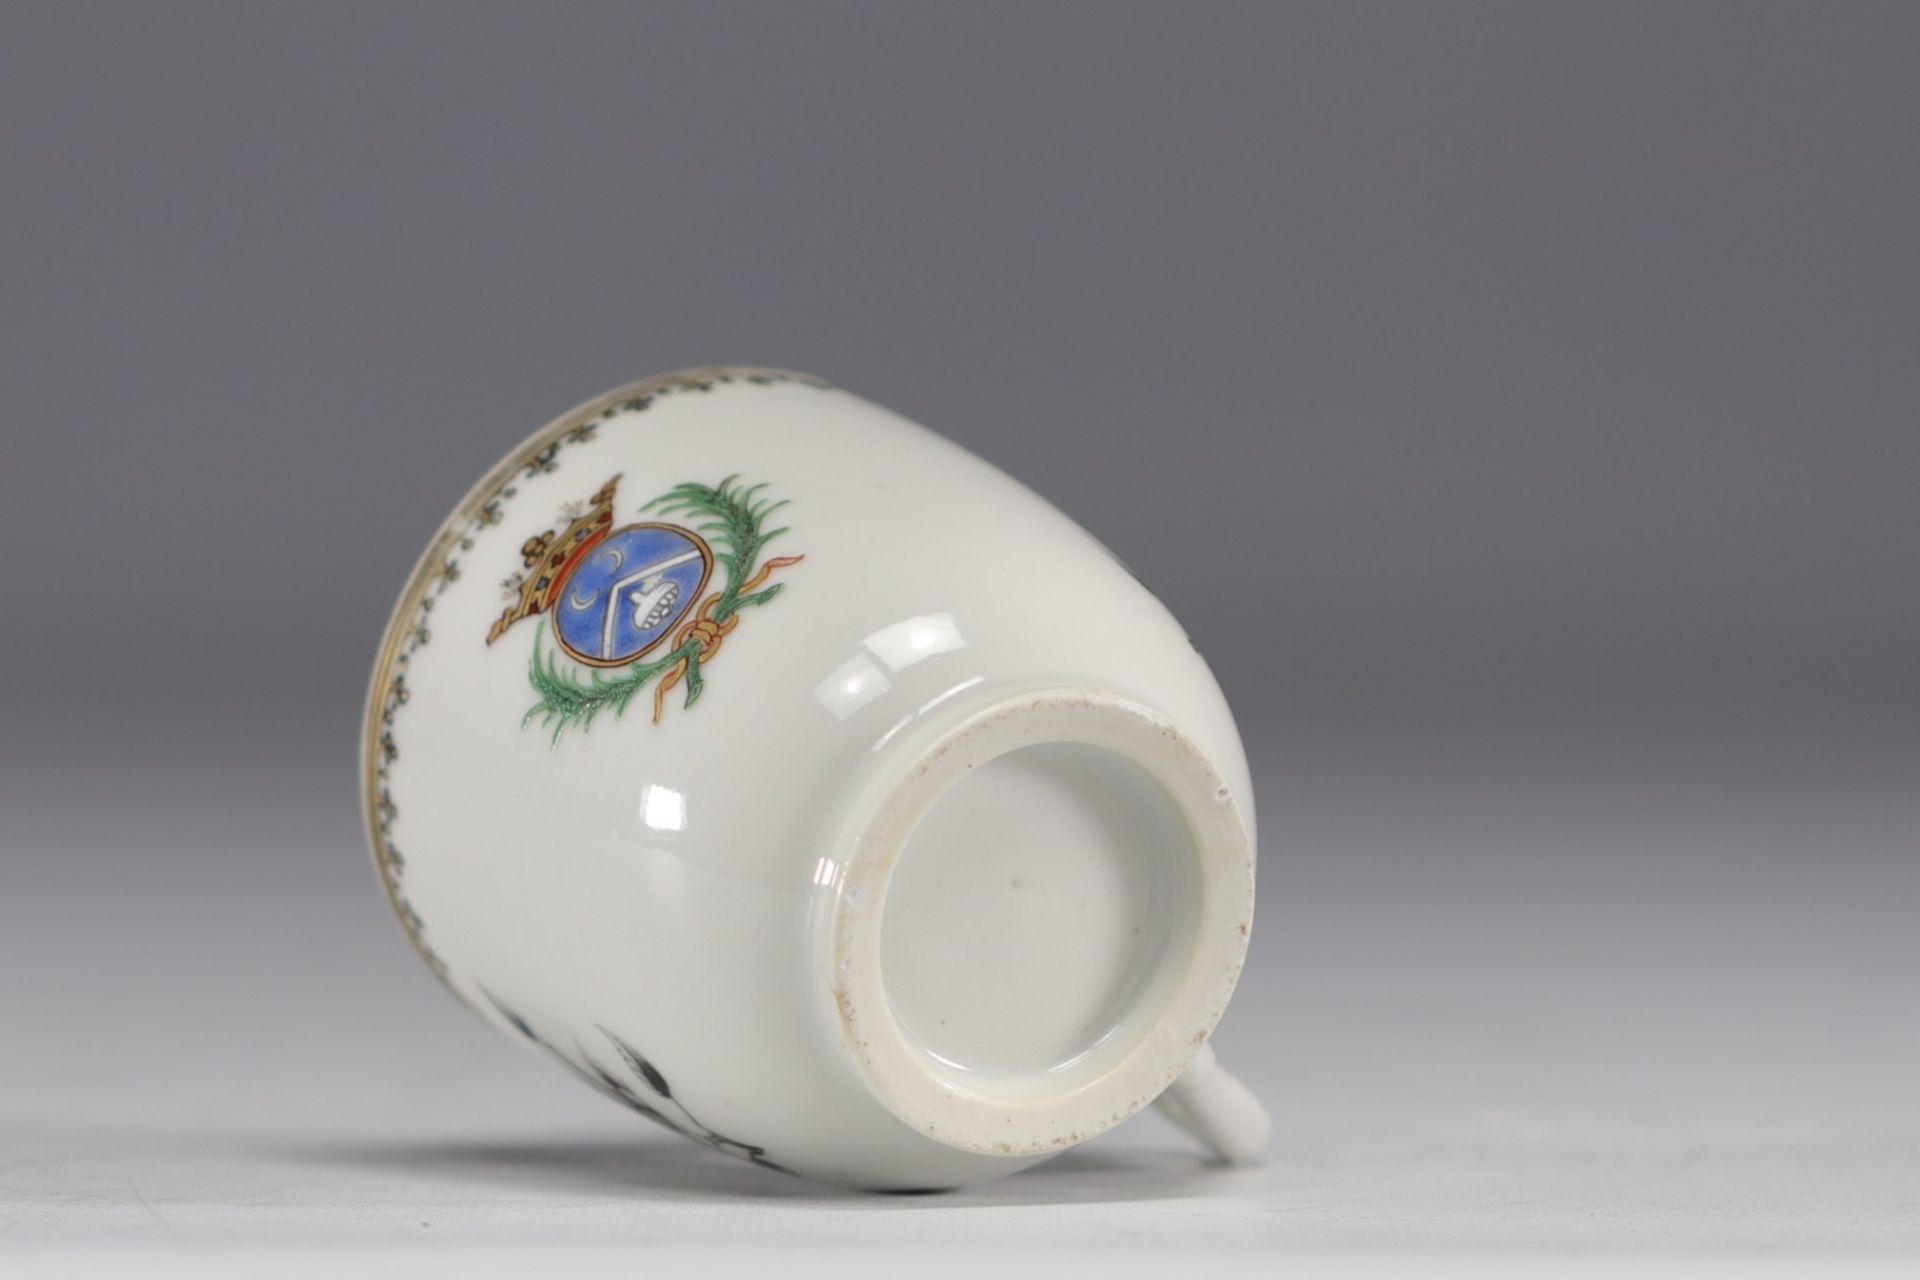 China - A Compagnie des Indes "Grisaille" porcelain cup decorated with a coat of arms and flowers, 1 - Image 3 of 4